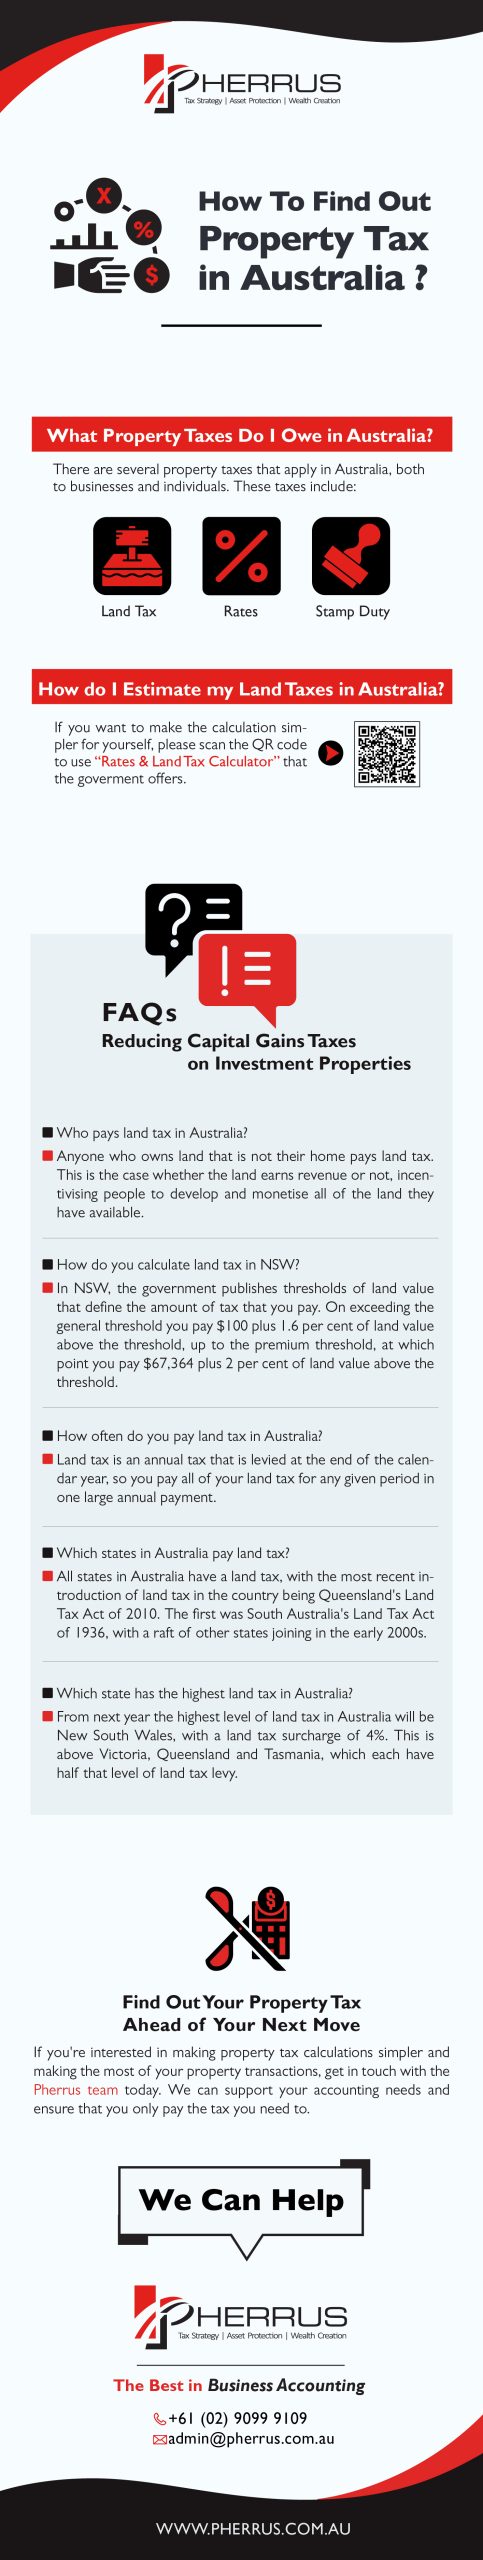 How to find out property tax infographic